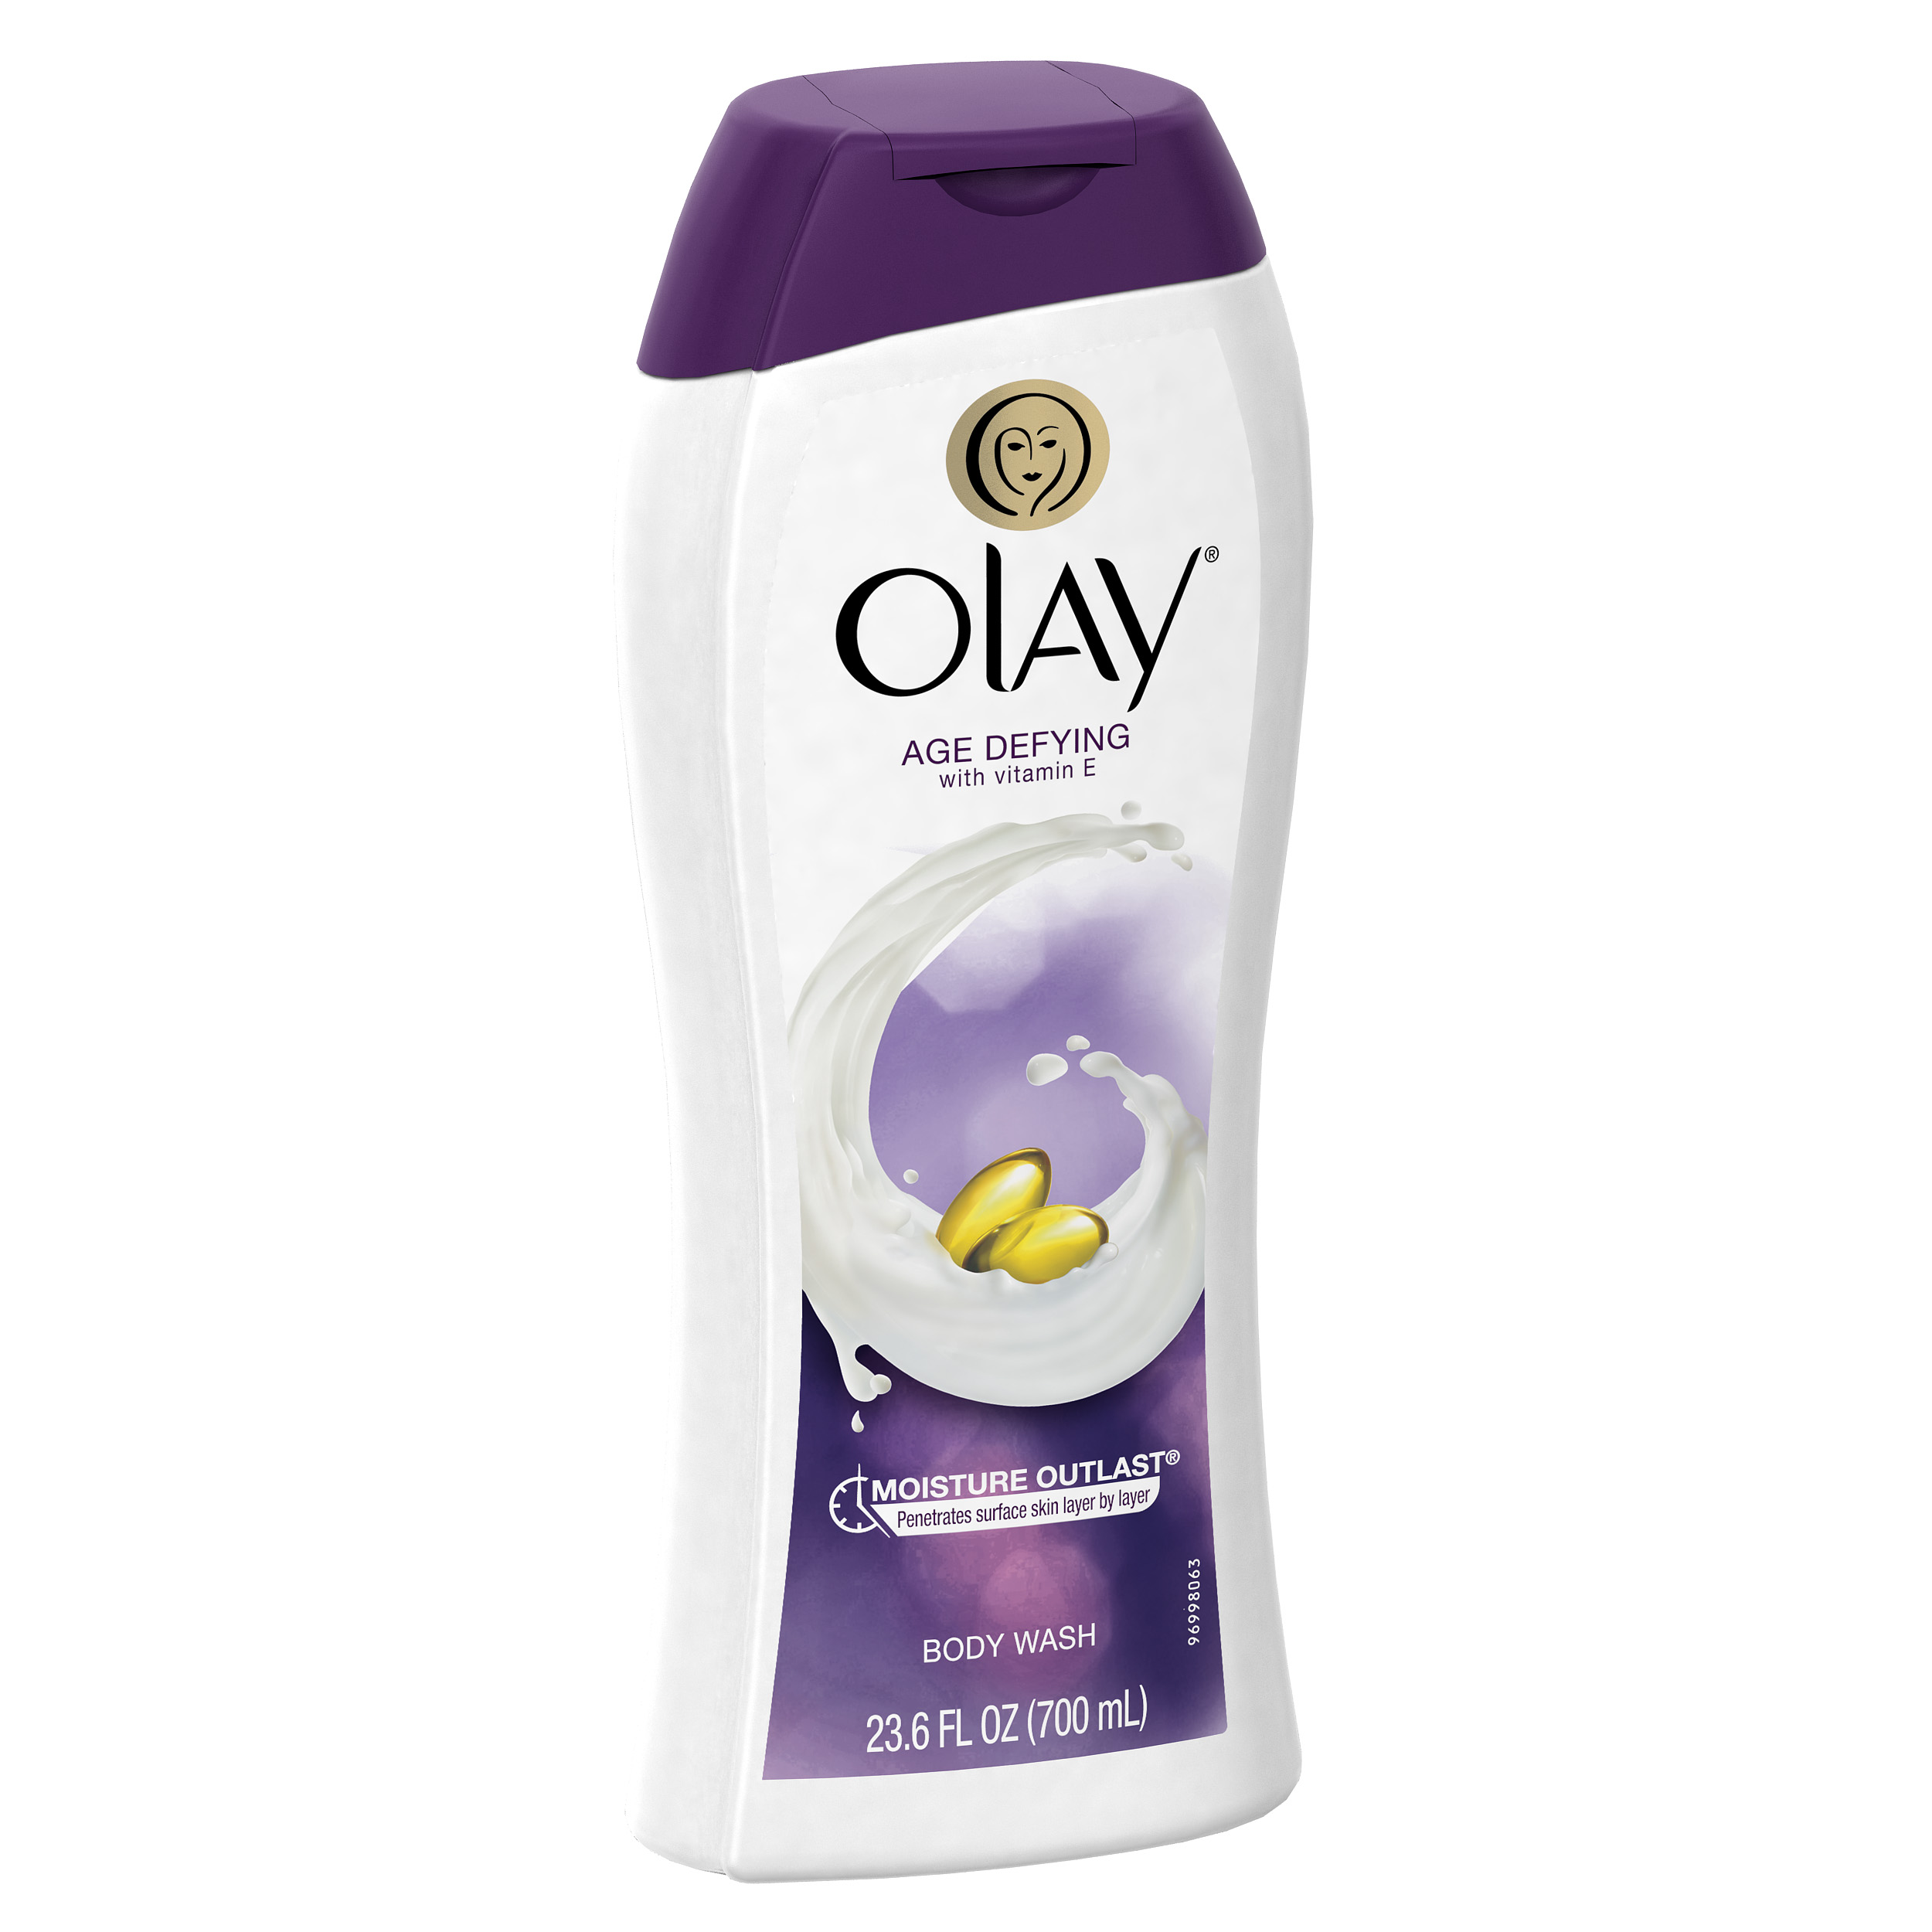 Olay Age Defying Body Wash With Vitamin E 23.6oz - image 3 of 5